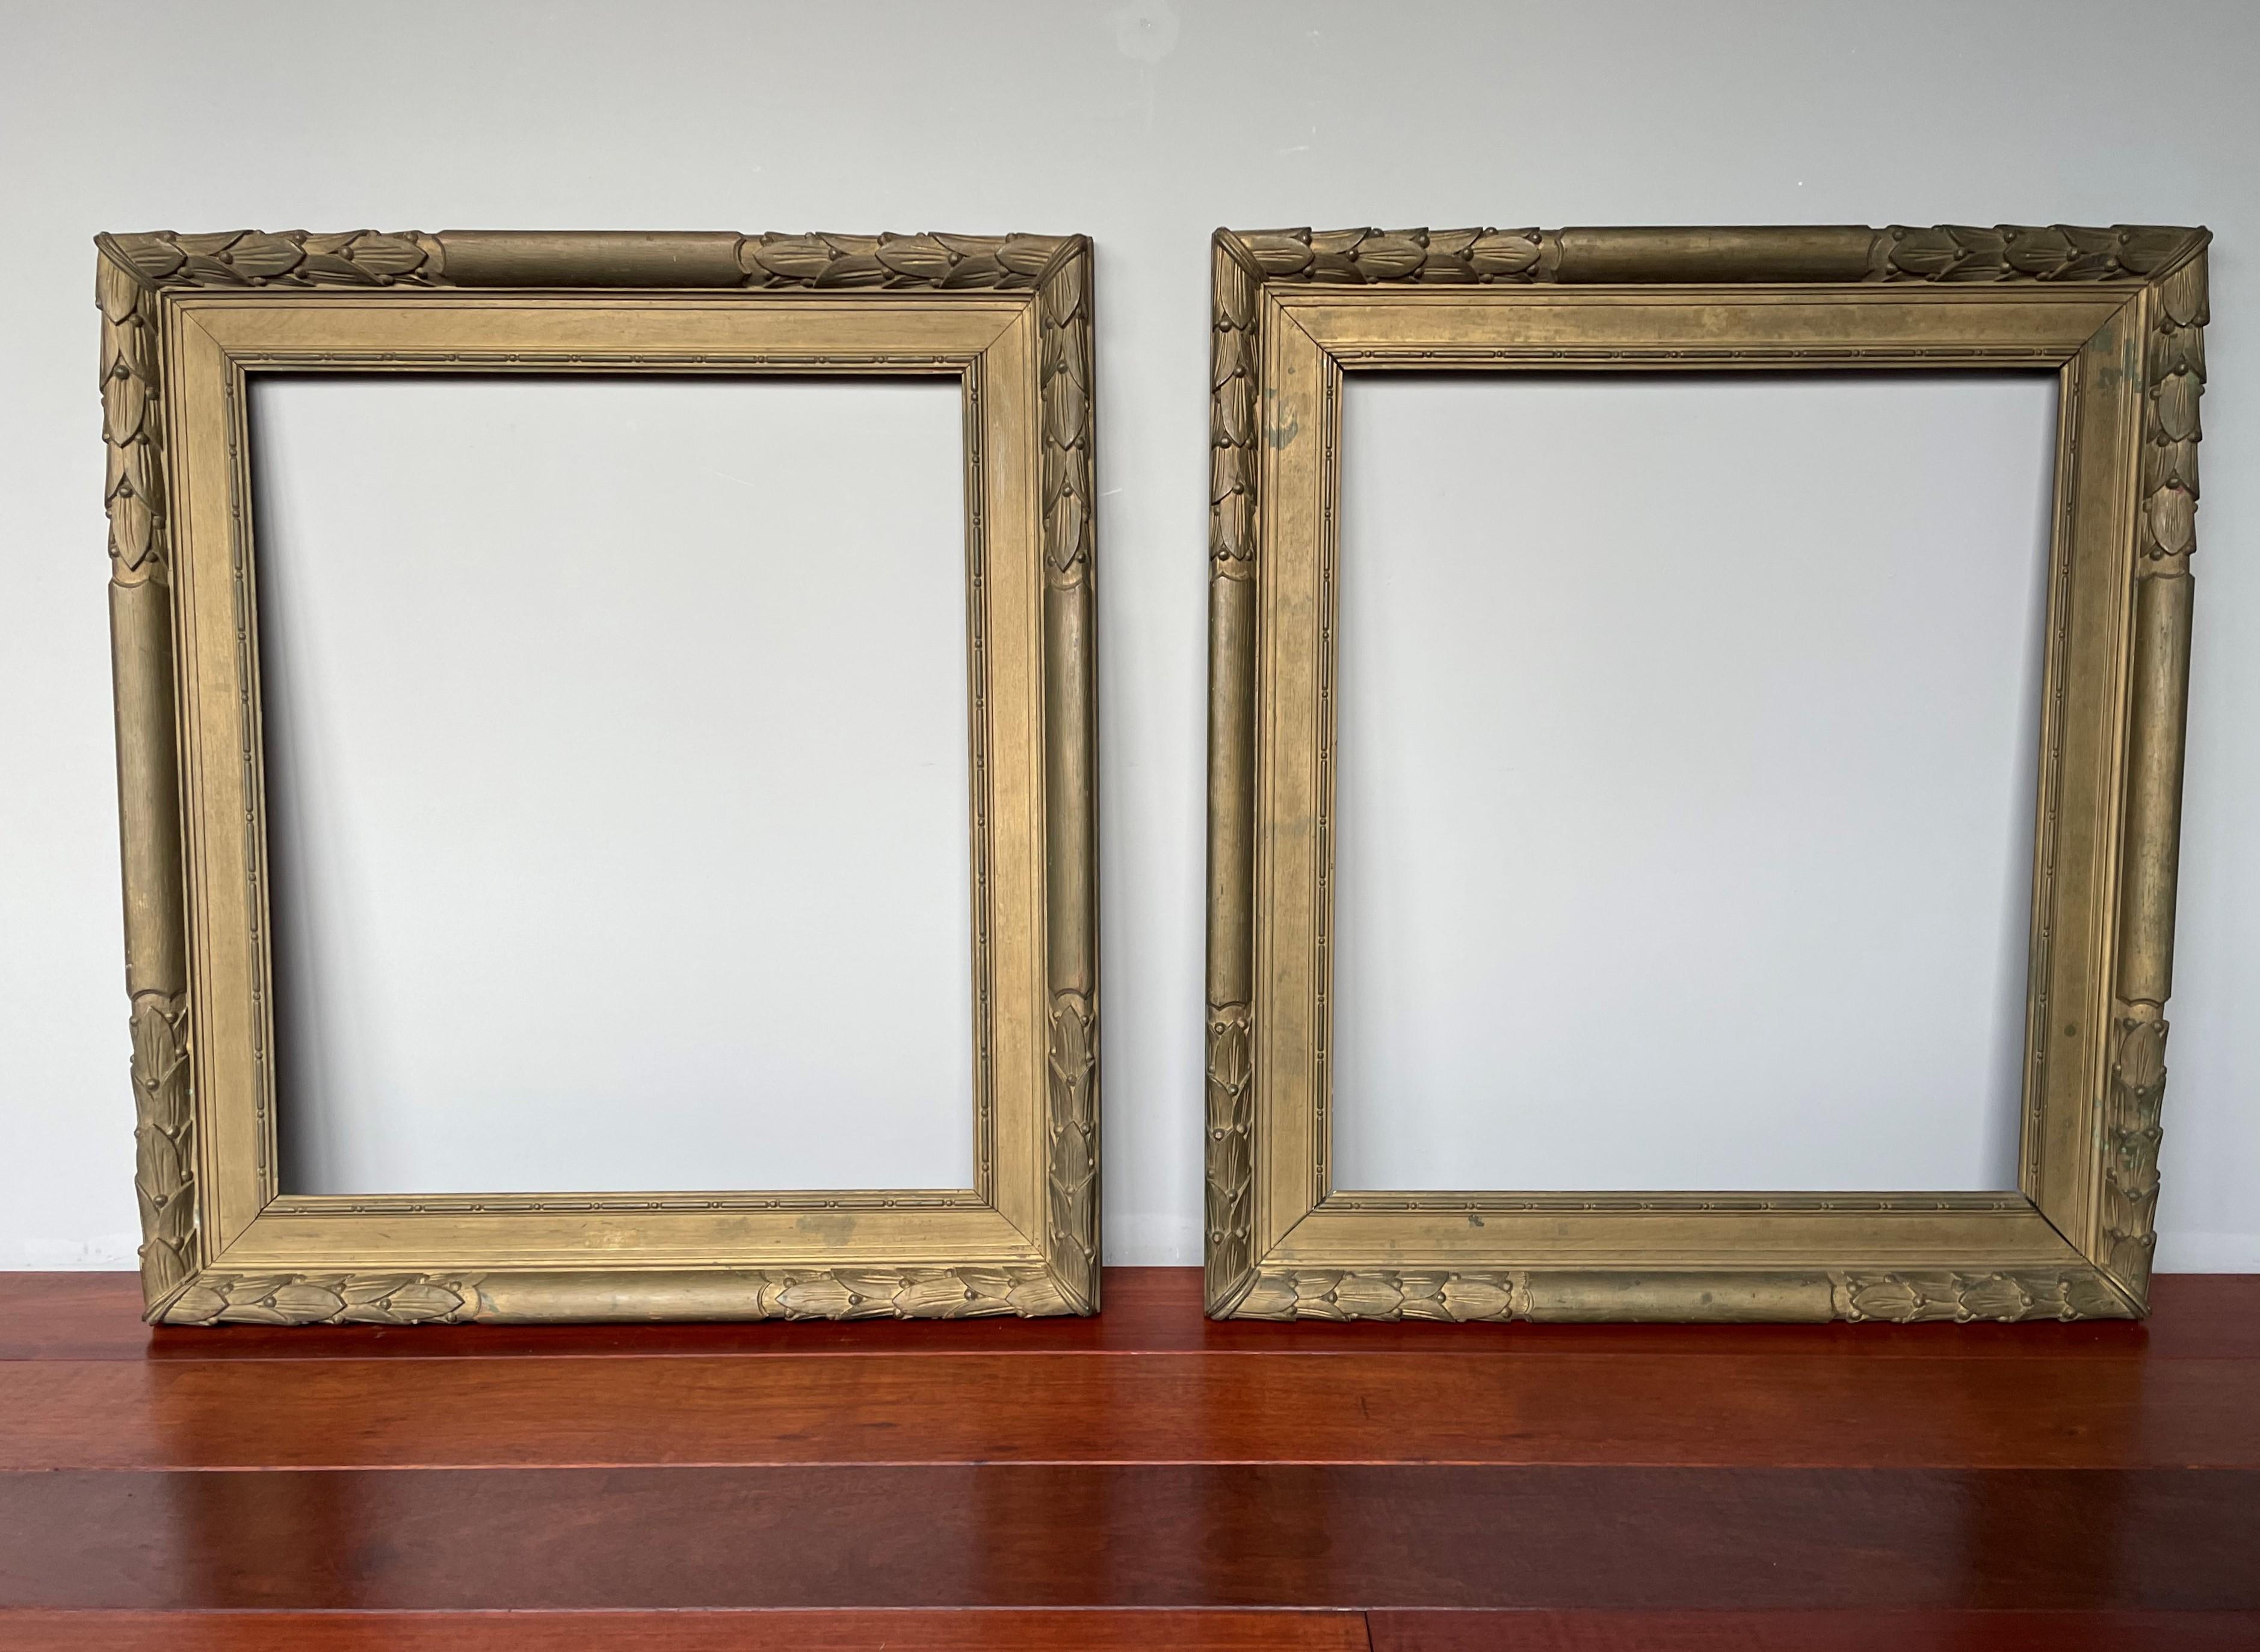 Large and marvelous pair of solid oak, antique wall mirror or picture frames.

If you are looking for a truly decorative and real antique pair of wall mirror or picture frames then these marvelous condition and beautifully patinated specimens could